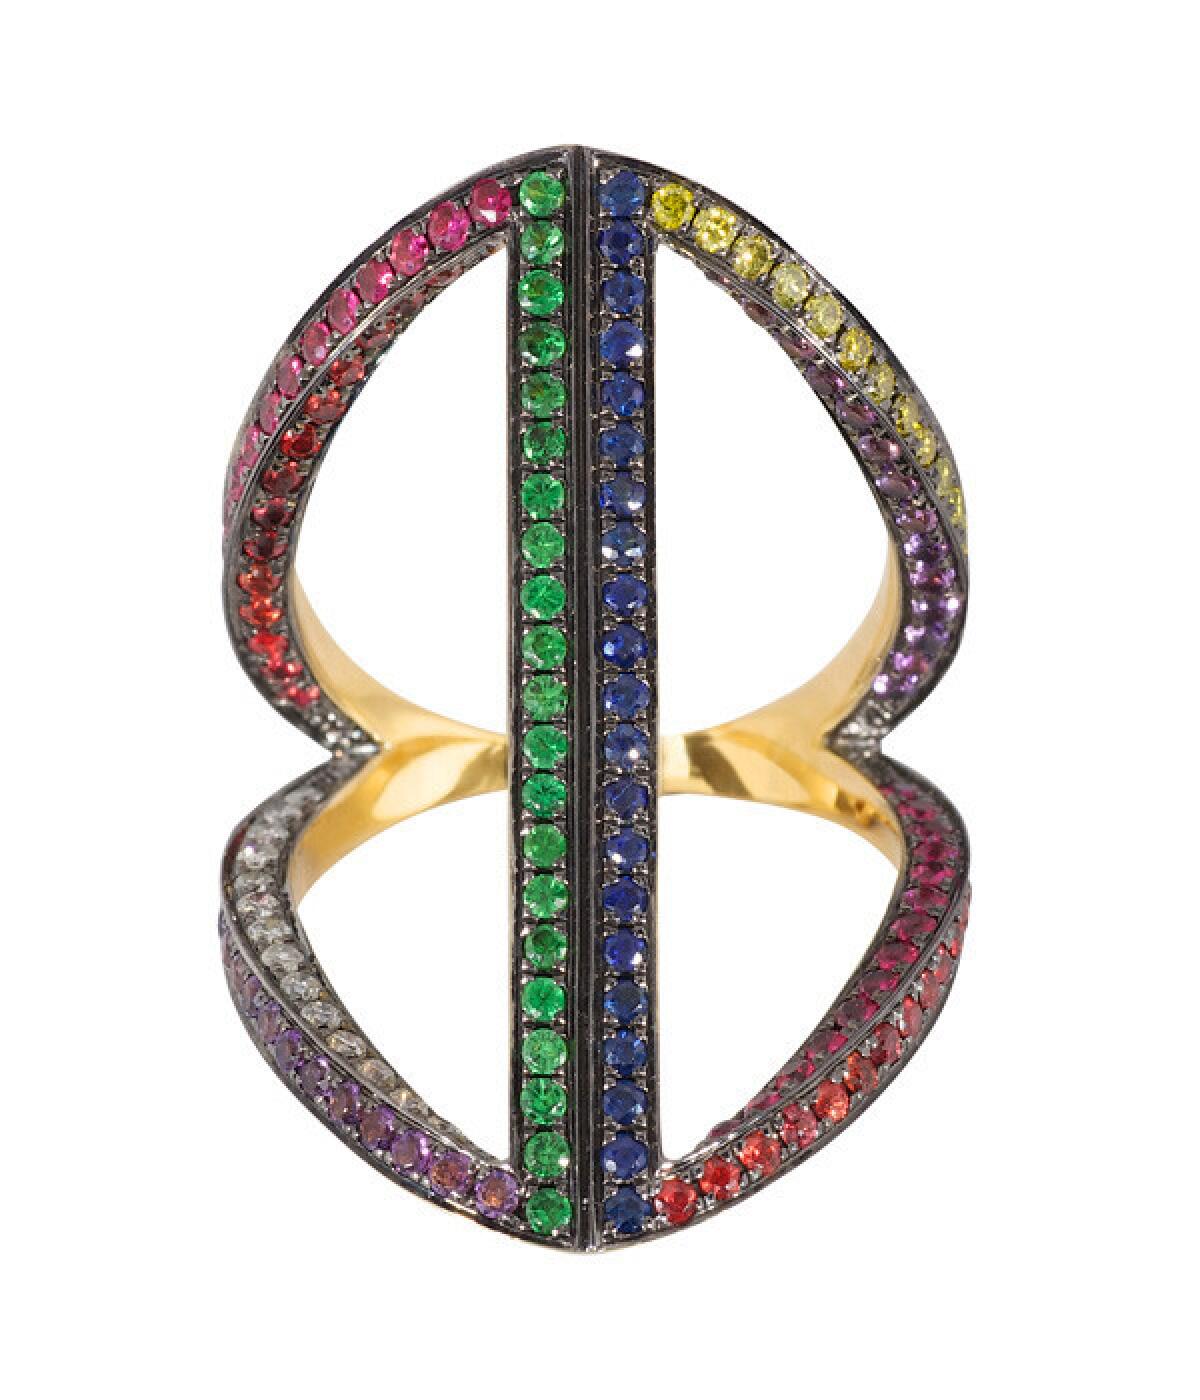 Noor Fares rhombus ring crafted in 18-karat yellow gold with multi-colored sapphires and a black rhodium finish.